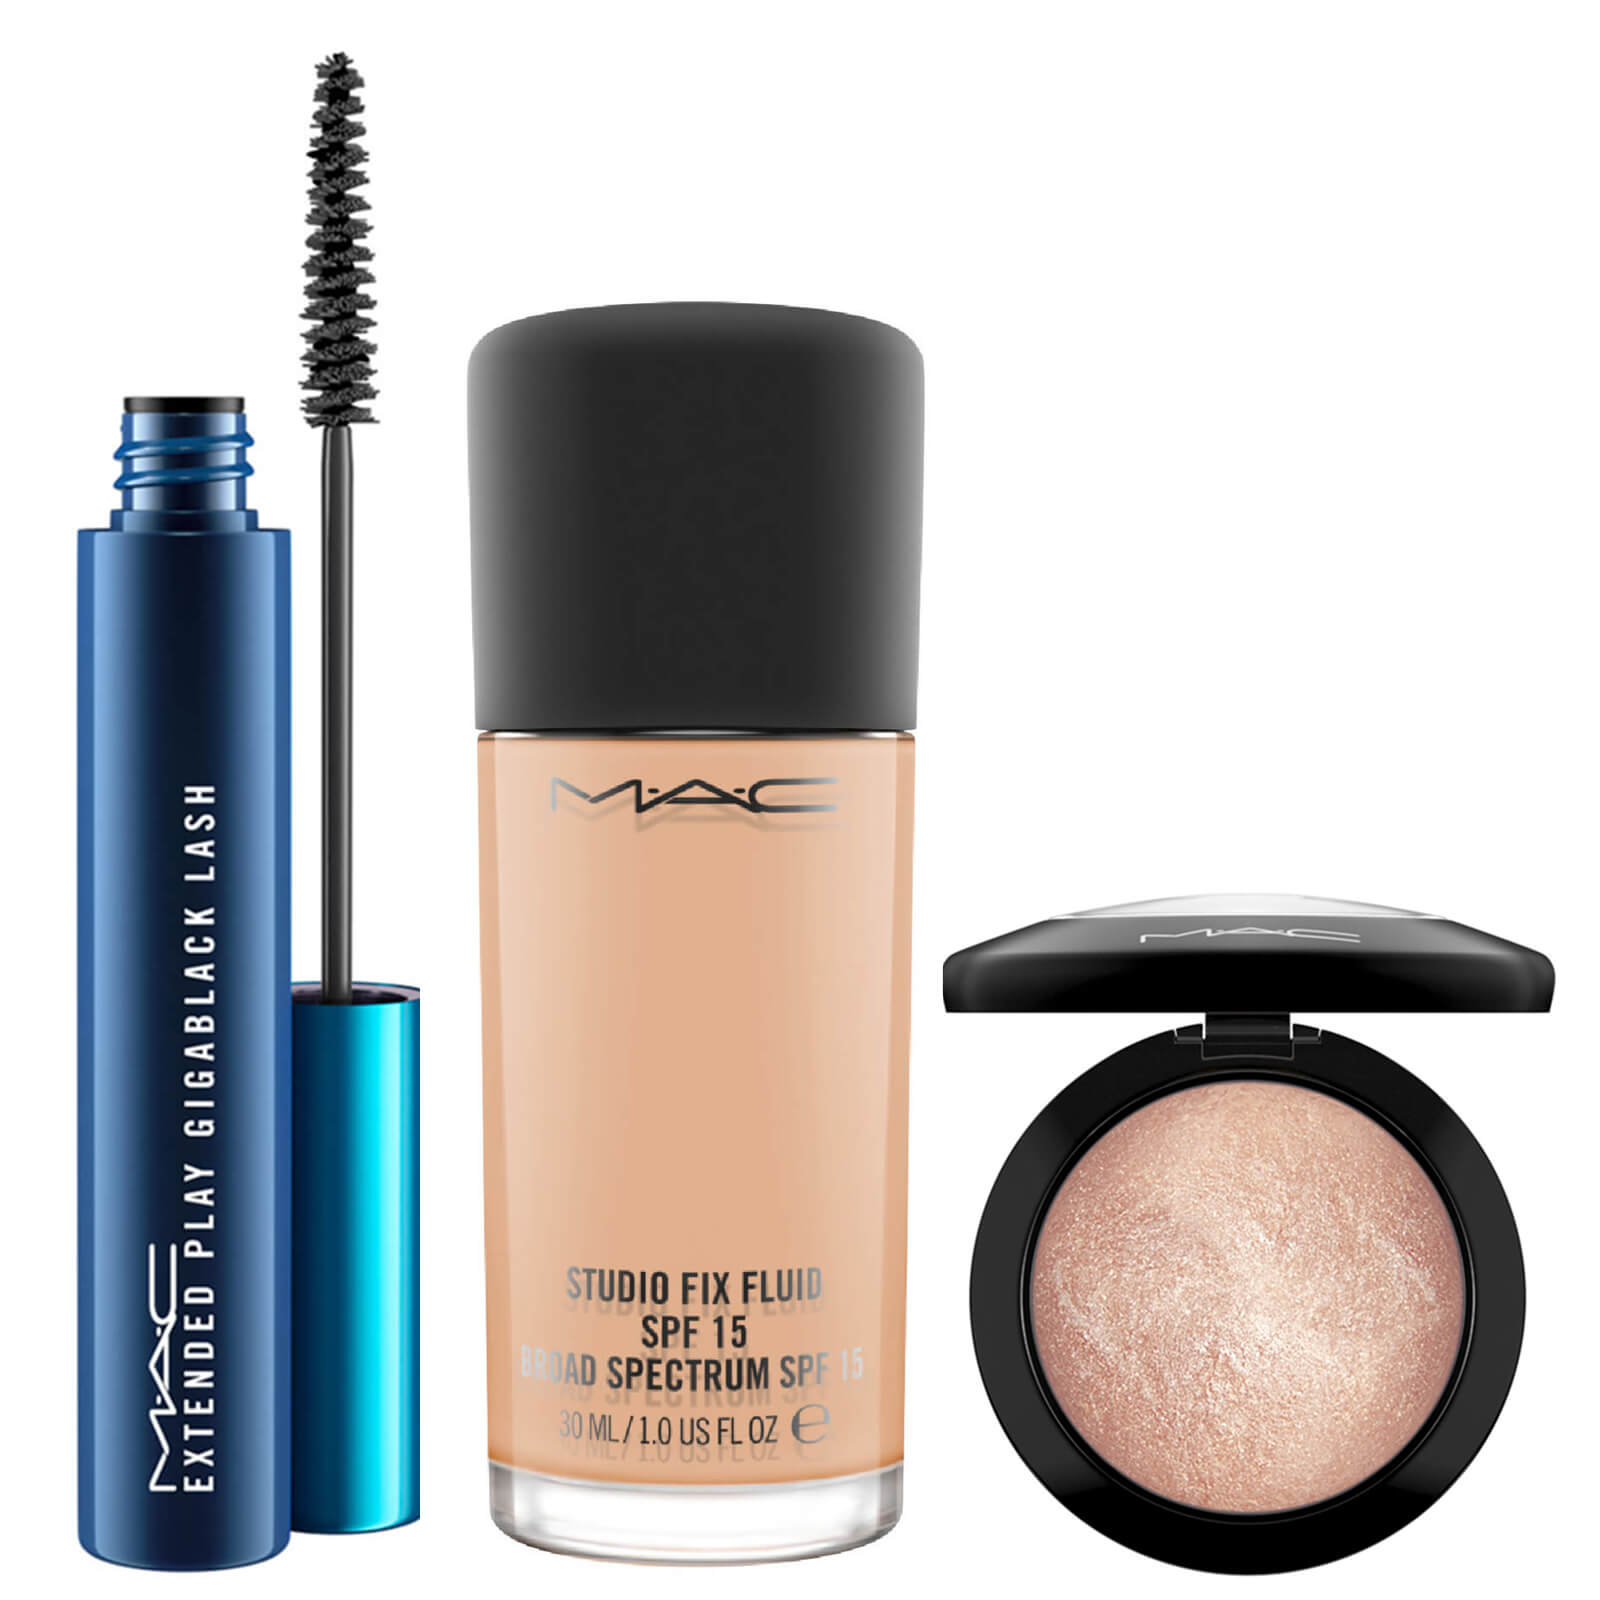 M·A·C Bestsellers Kit (Various Shades) - NW25